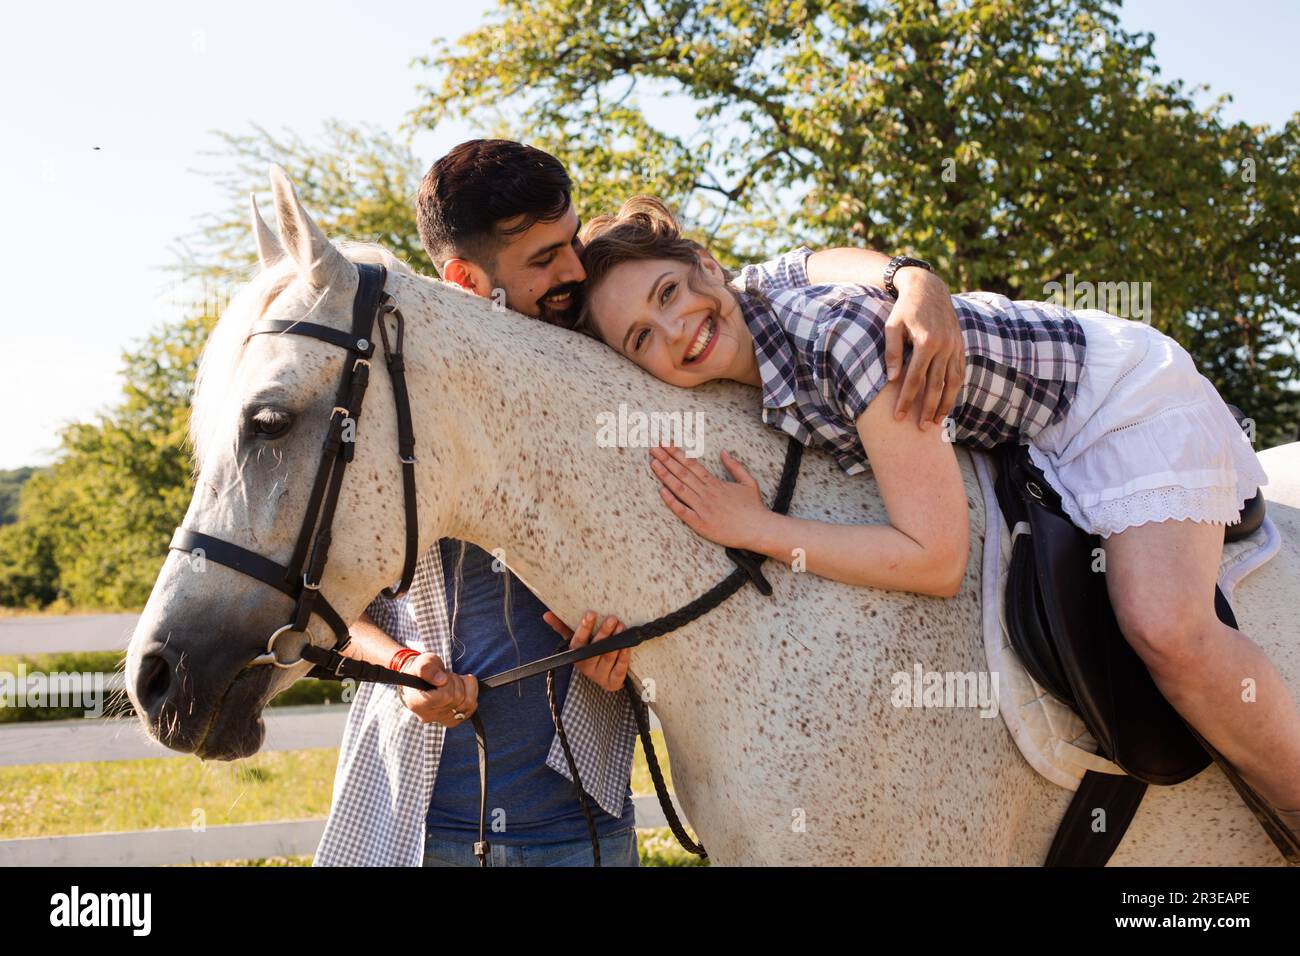 The young couple are having fun time with horse Stock Photo